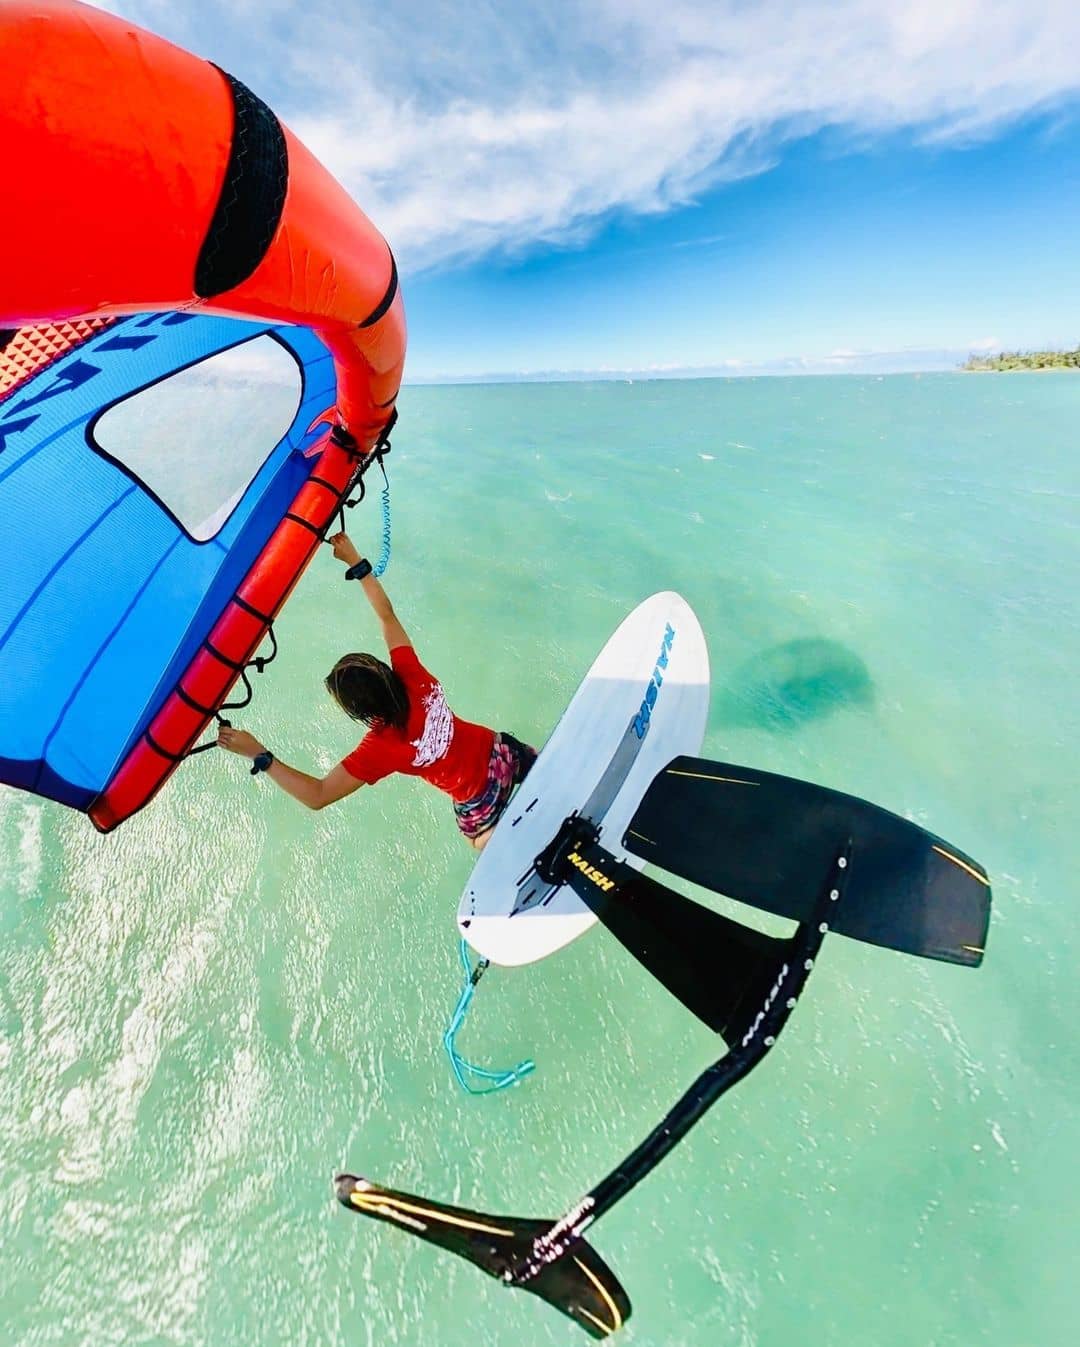 @koafabbio is jumping for joy on his MA 850 Foil because its Aloha Friday! What are your weekend plans!?